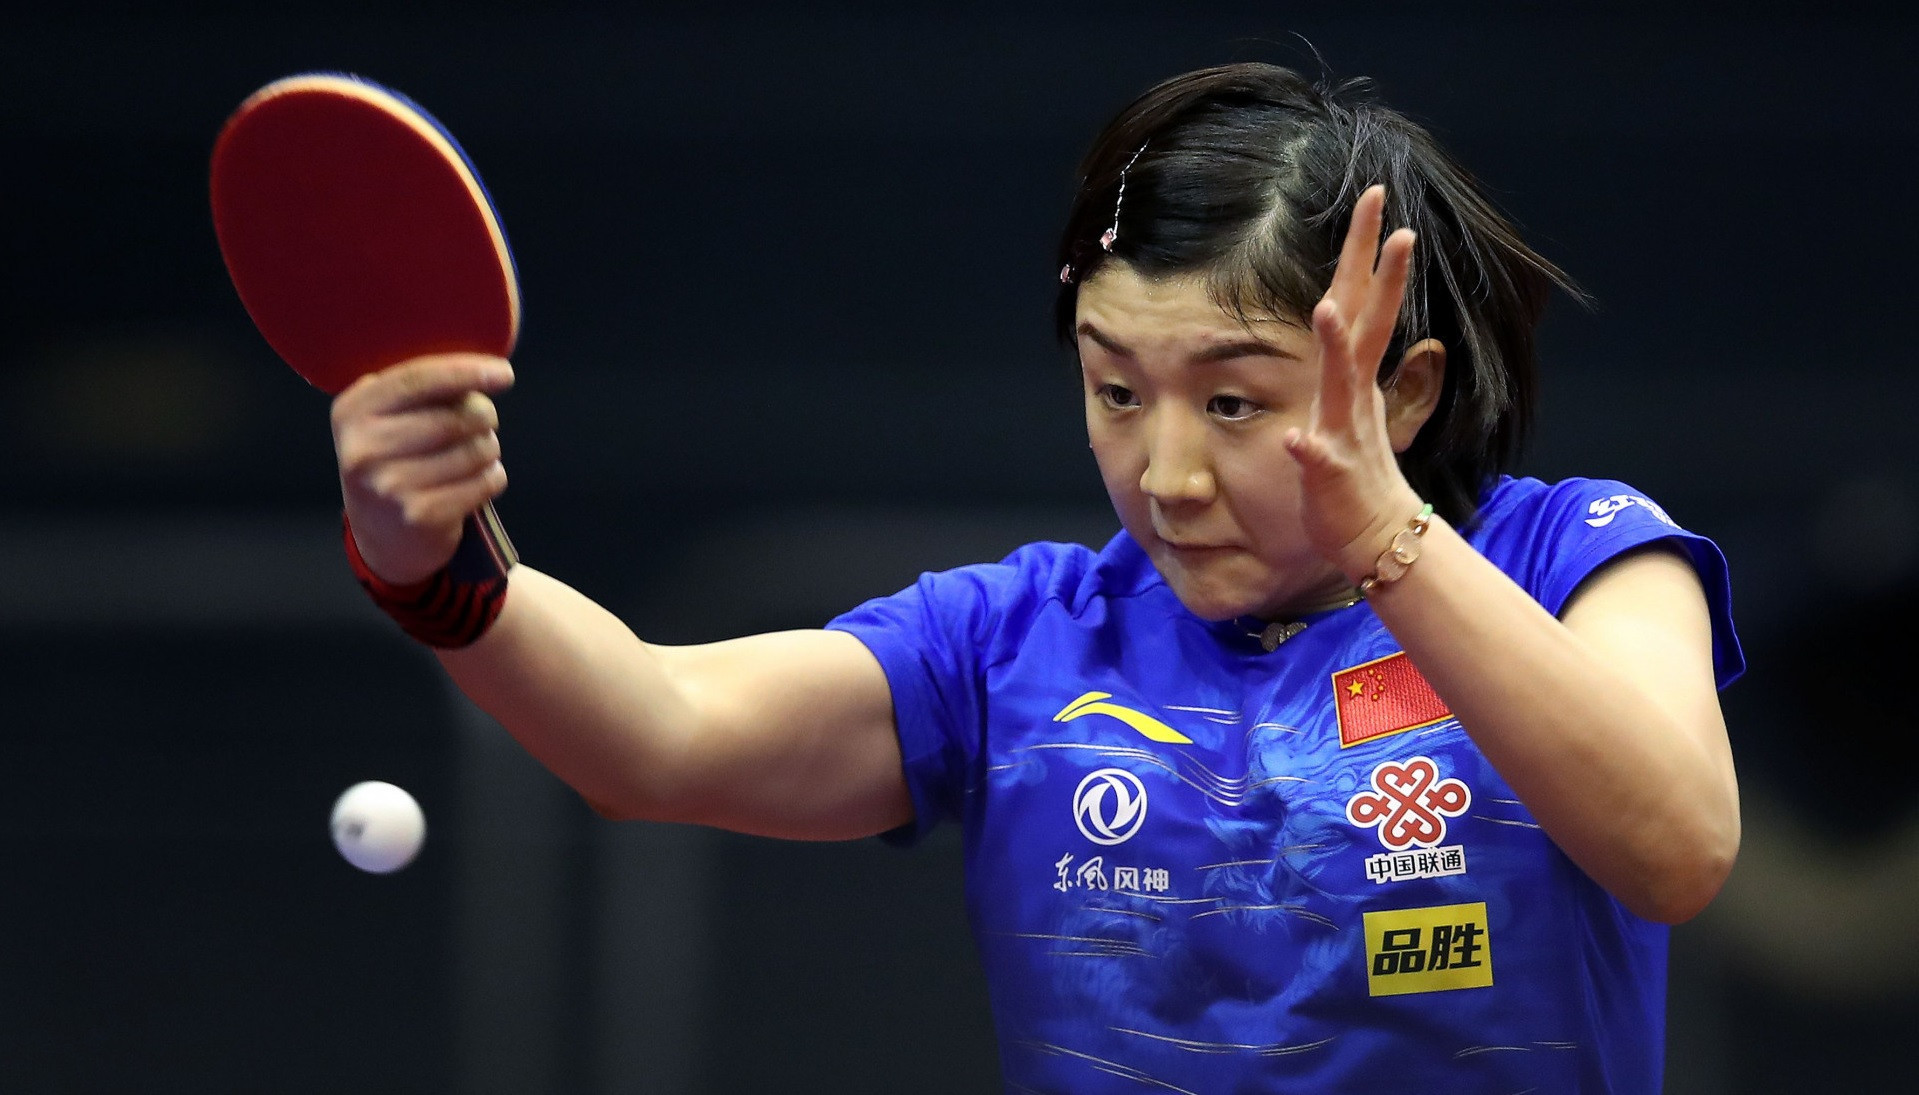 Top seed and world number one Chen Meng came from a game down to reach the semi-finals of the ITTF German Open - ©Getty Images